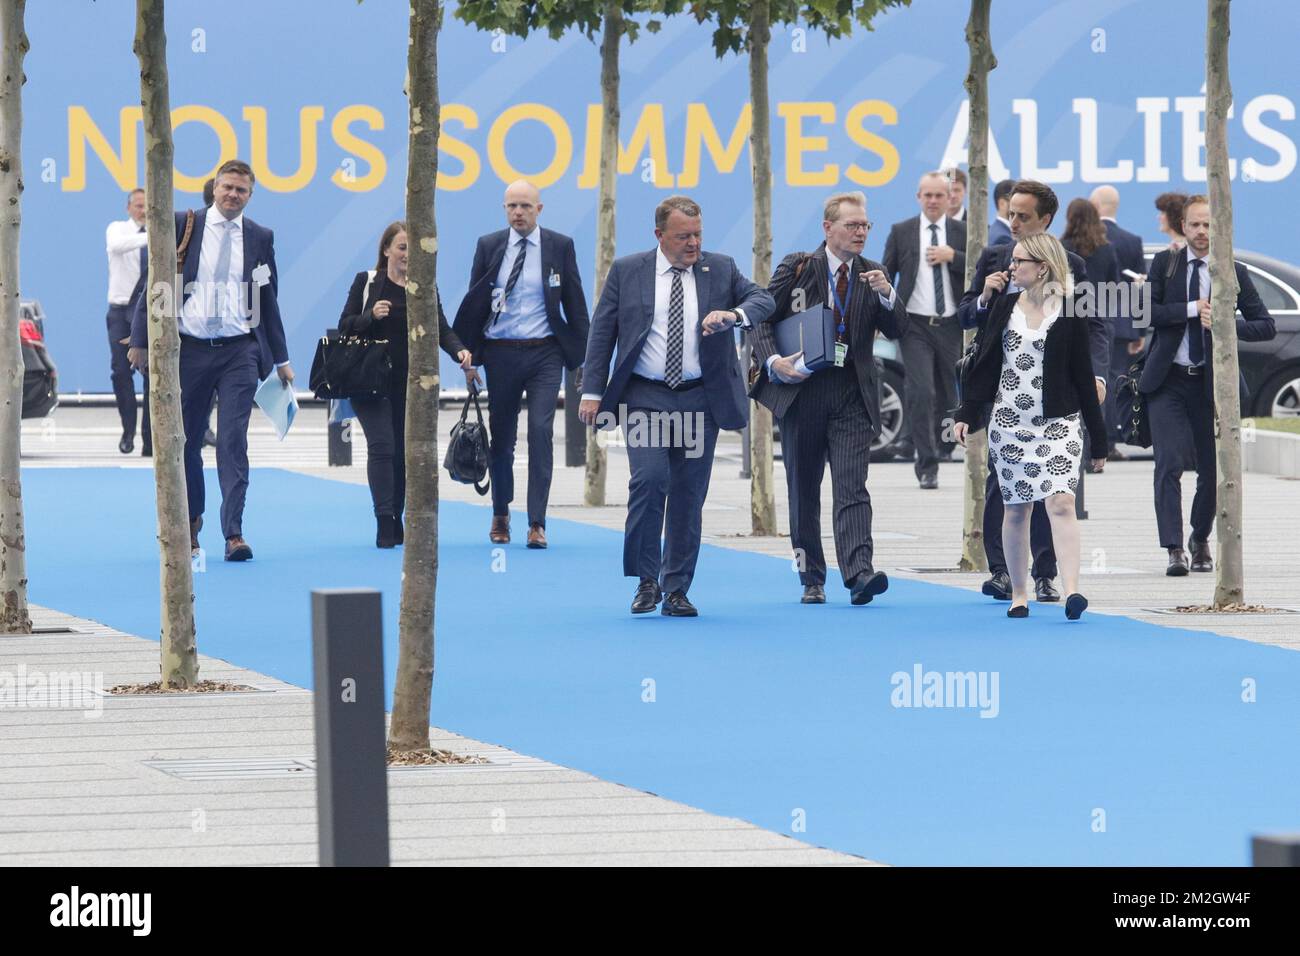 Denmark Prime Minister Lars Lokke Rasmussen (C) pictured at the arrivals on day two of a summit of the NATO (North Atlantic Treaty Organization) military alliance, Thursday 12 July 2018, in Brussels. BELGA PHOTO POOL PABLO GARRIGOS CUCARELLA  Stock Photo